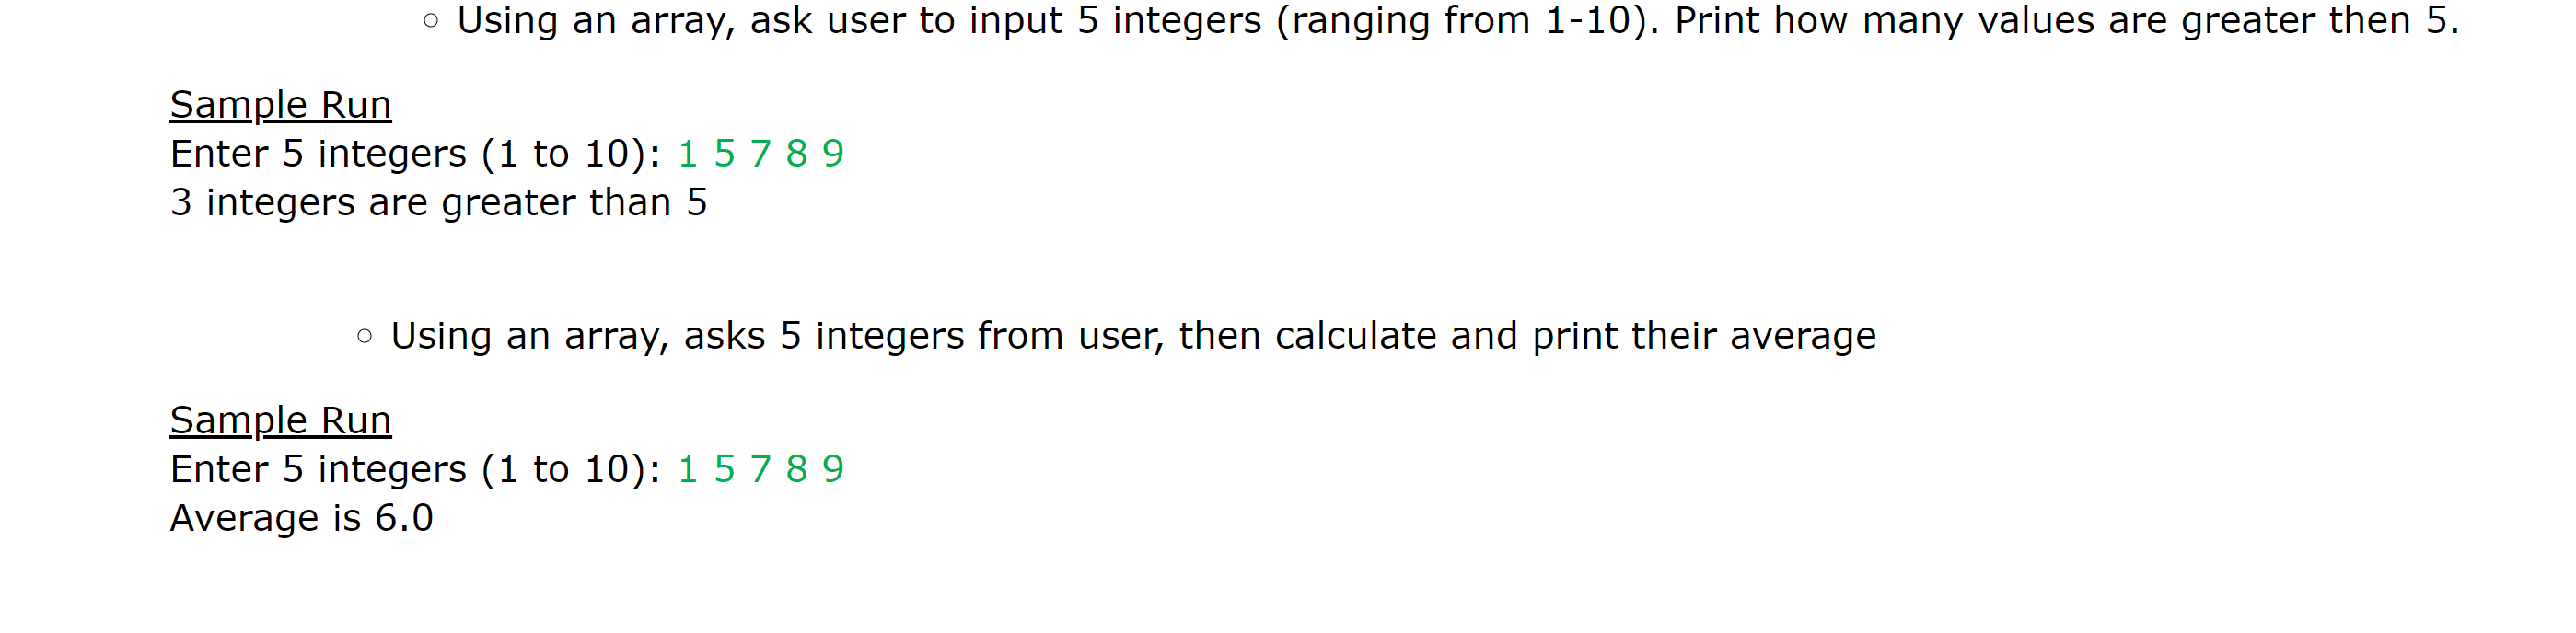 Using an array, ask user to input 5 integers (ranging from 1-10). Print how many values are greater then 5
Sample Run
Enter 5 integers (1 to 10): 1 5789
3 integers are greater than 5
Using an array, asks 5 integers from user, then calculate and print their average
Sample Run
Enter 5 integers (1 to 10): 1 5789
Average is 6.0
